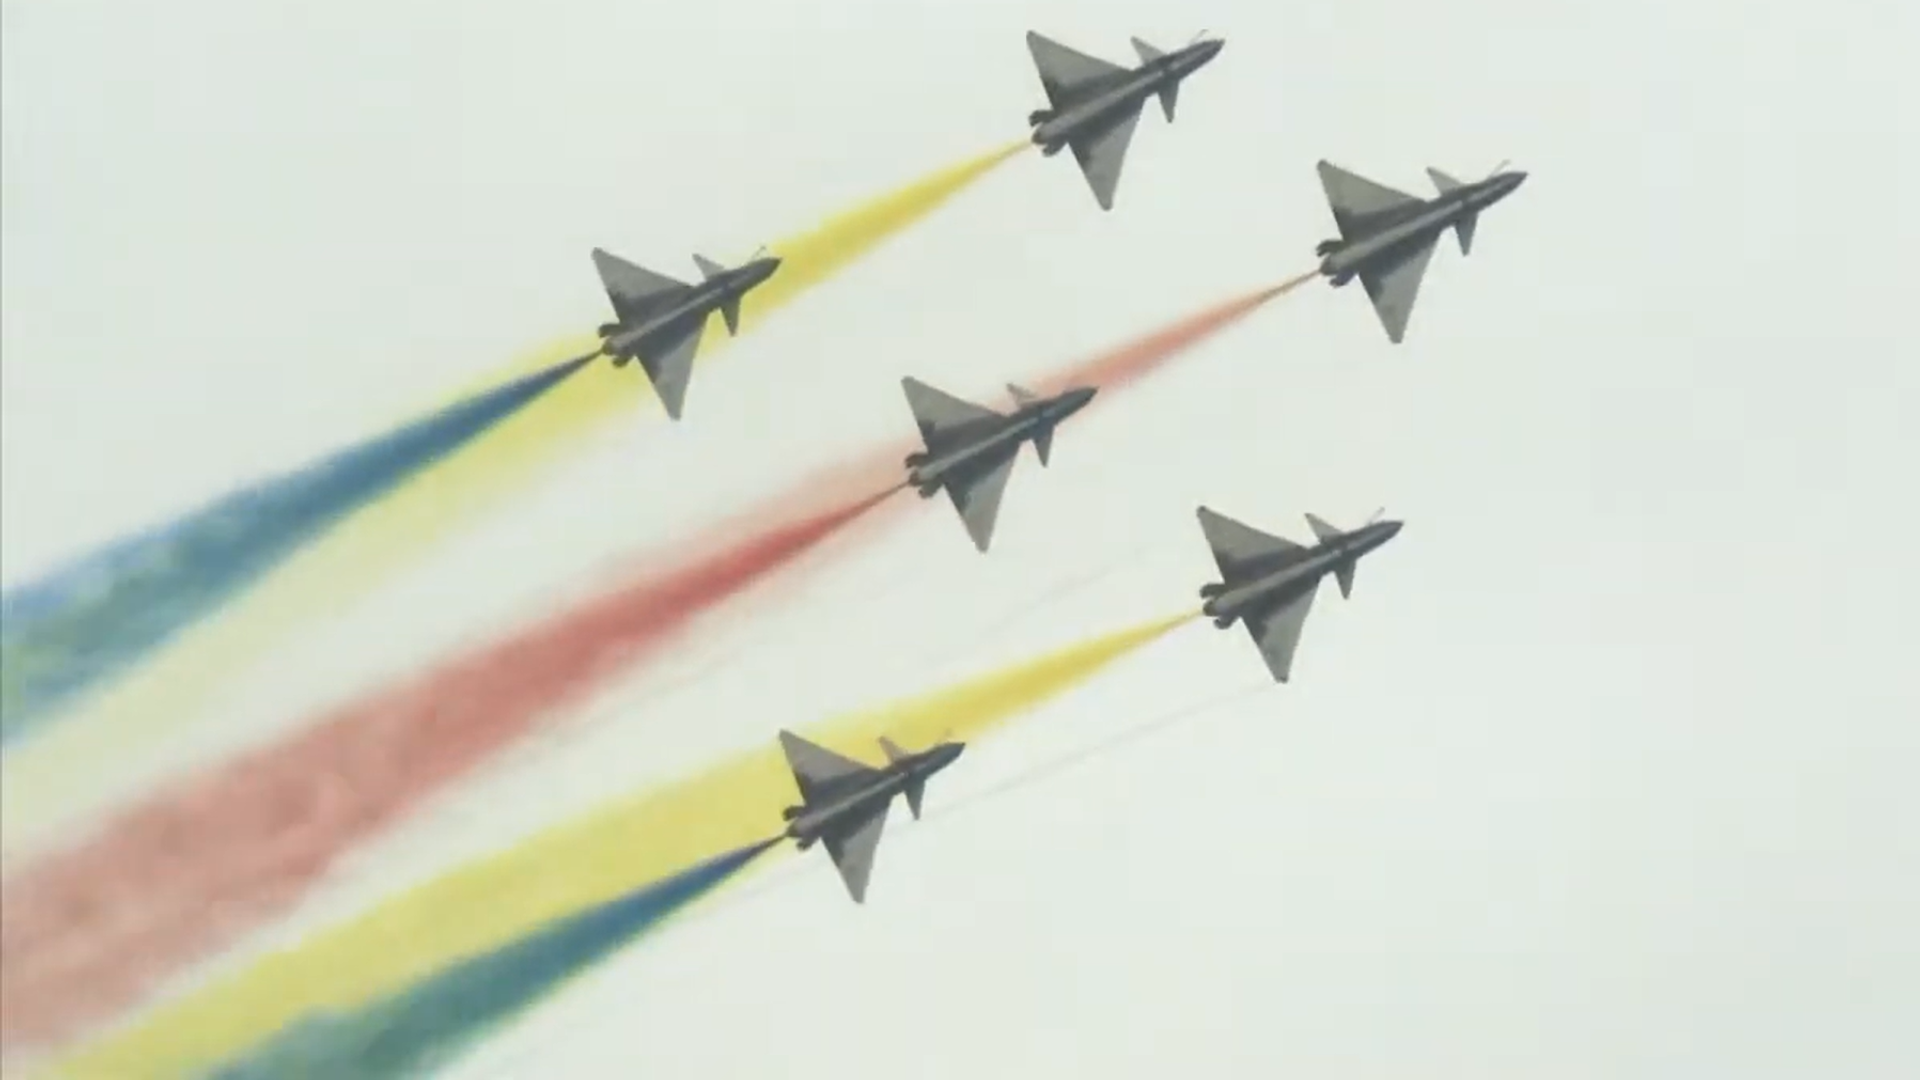 The August 1 aerobatic team flying in formation at Air Show China 2022 in Zhuhai on November 8, 2022. - Sputnik International, 1920, 08.11.2022